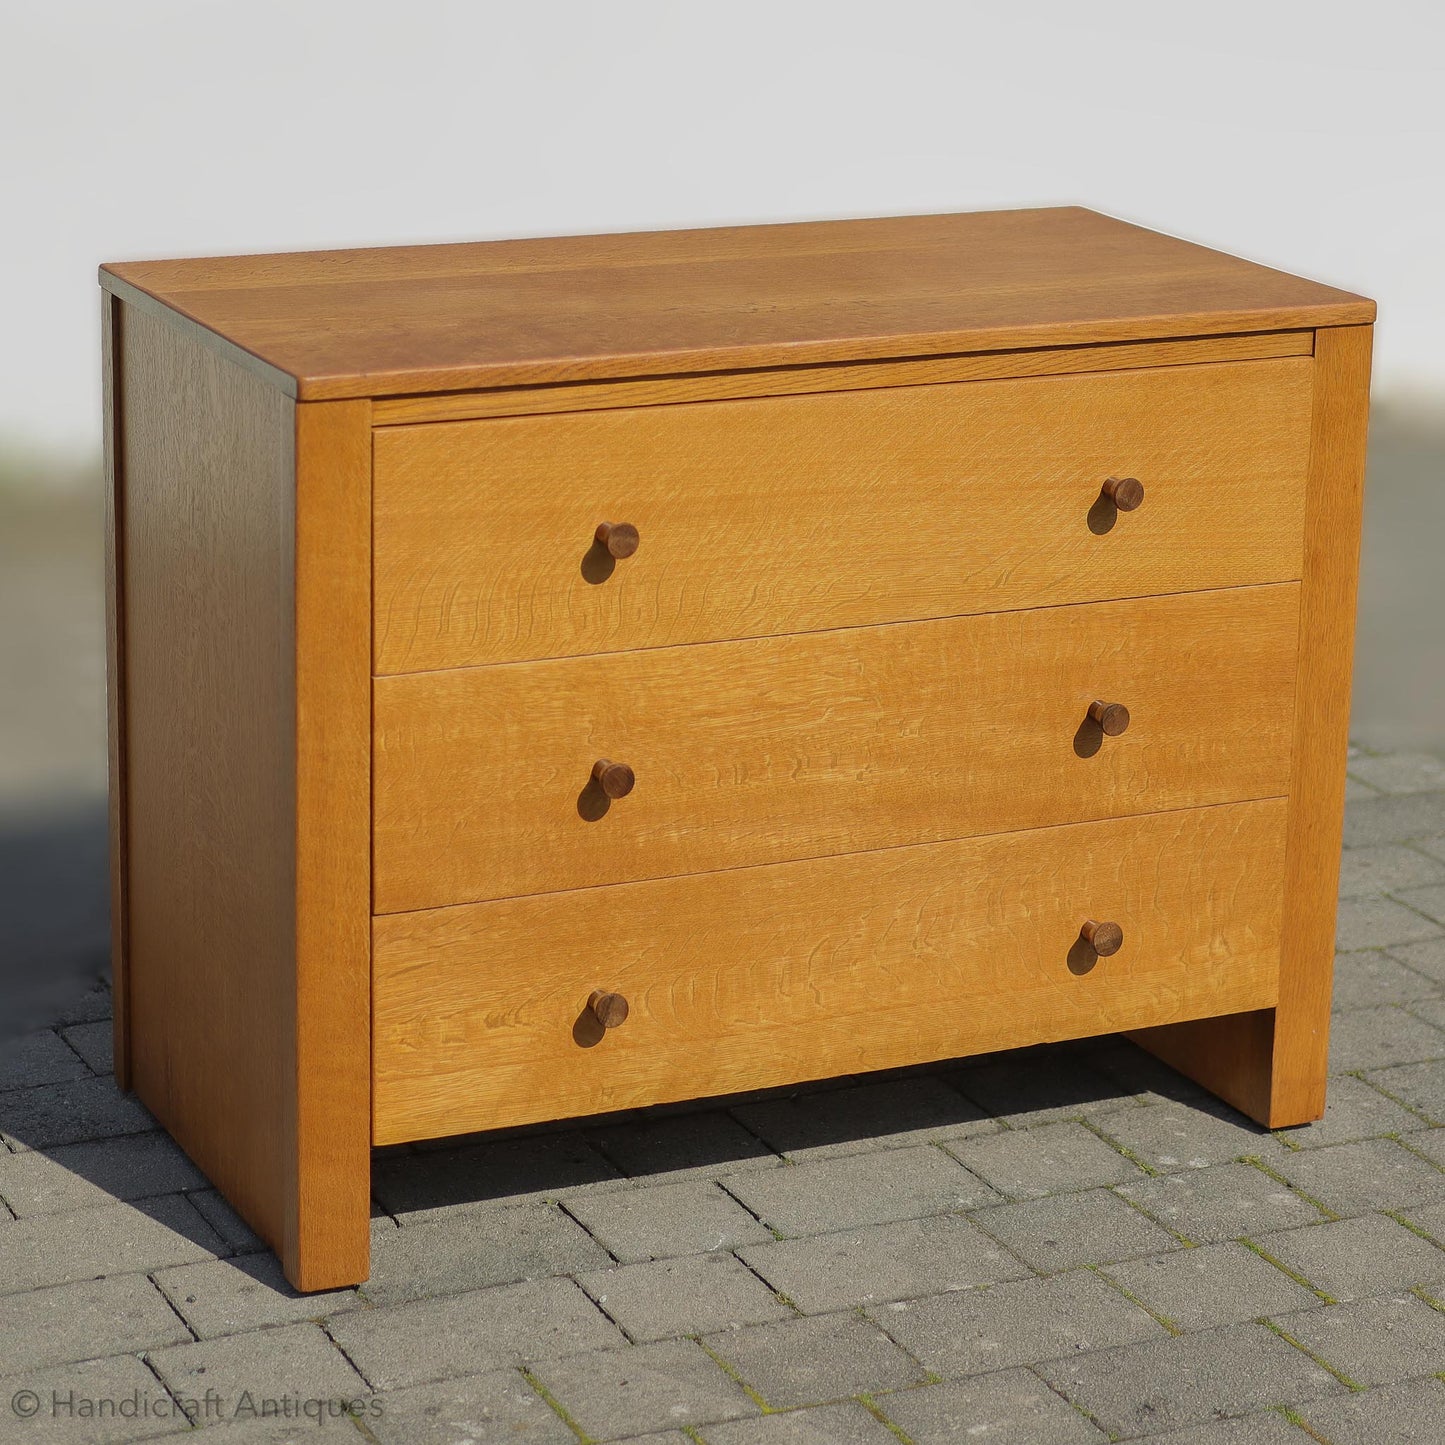 Gordon Russell Arts & Crafts Cotswold School English Oak Chest of Drawers c. 1935